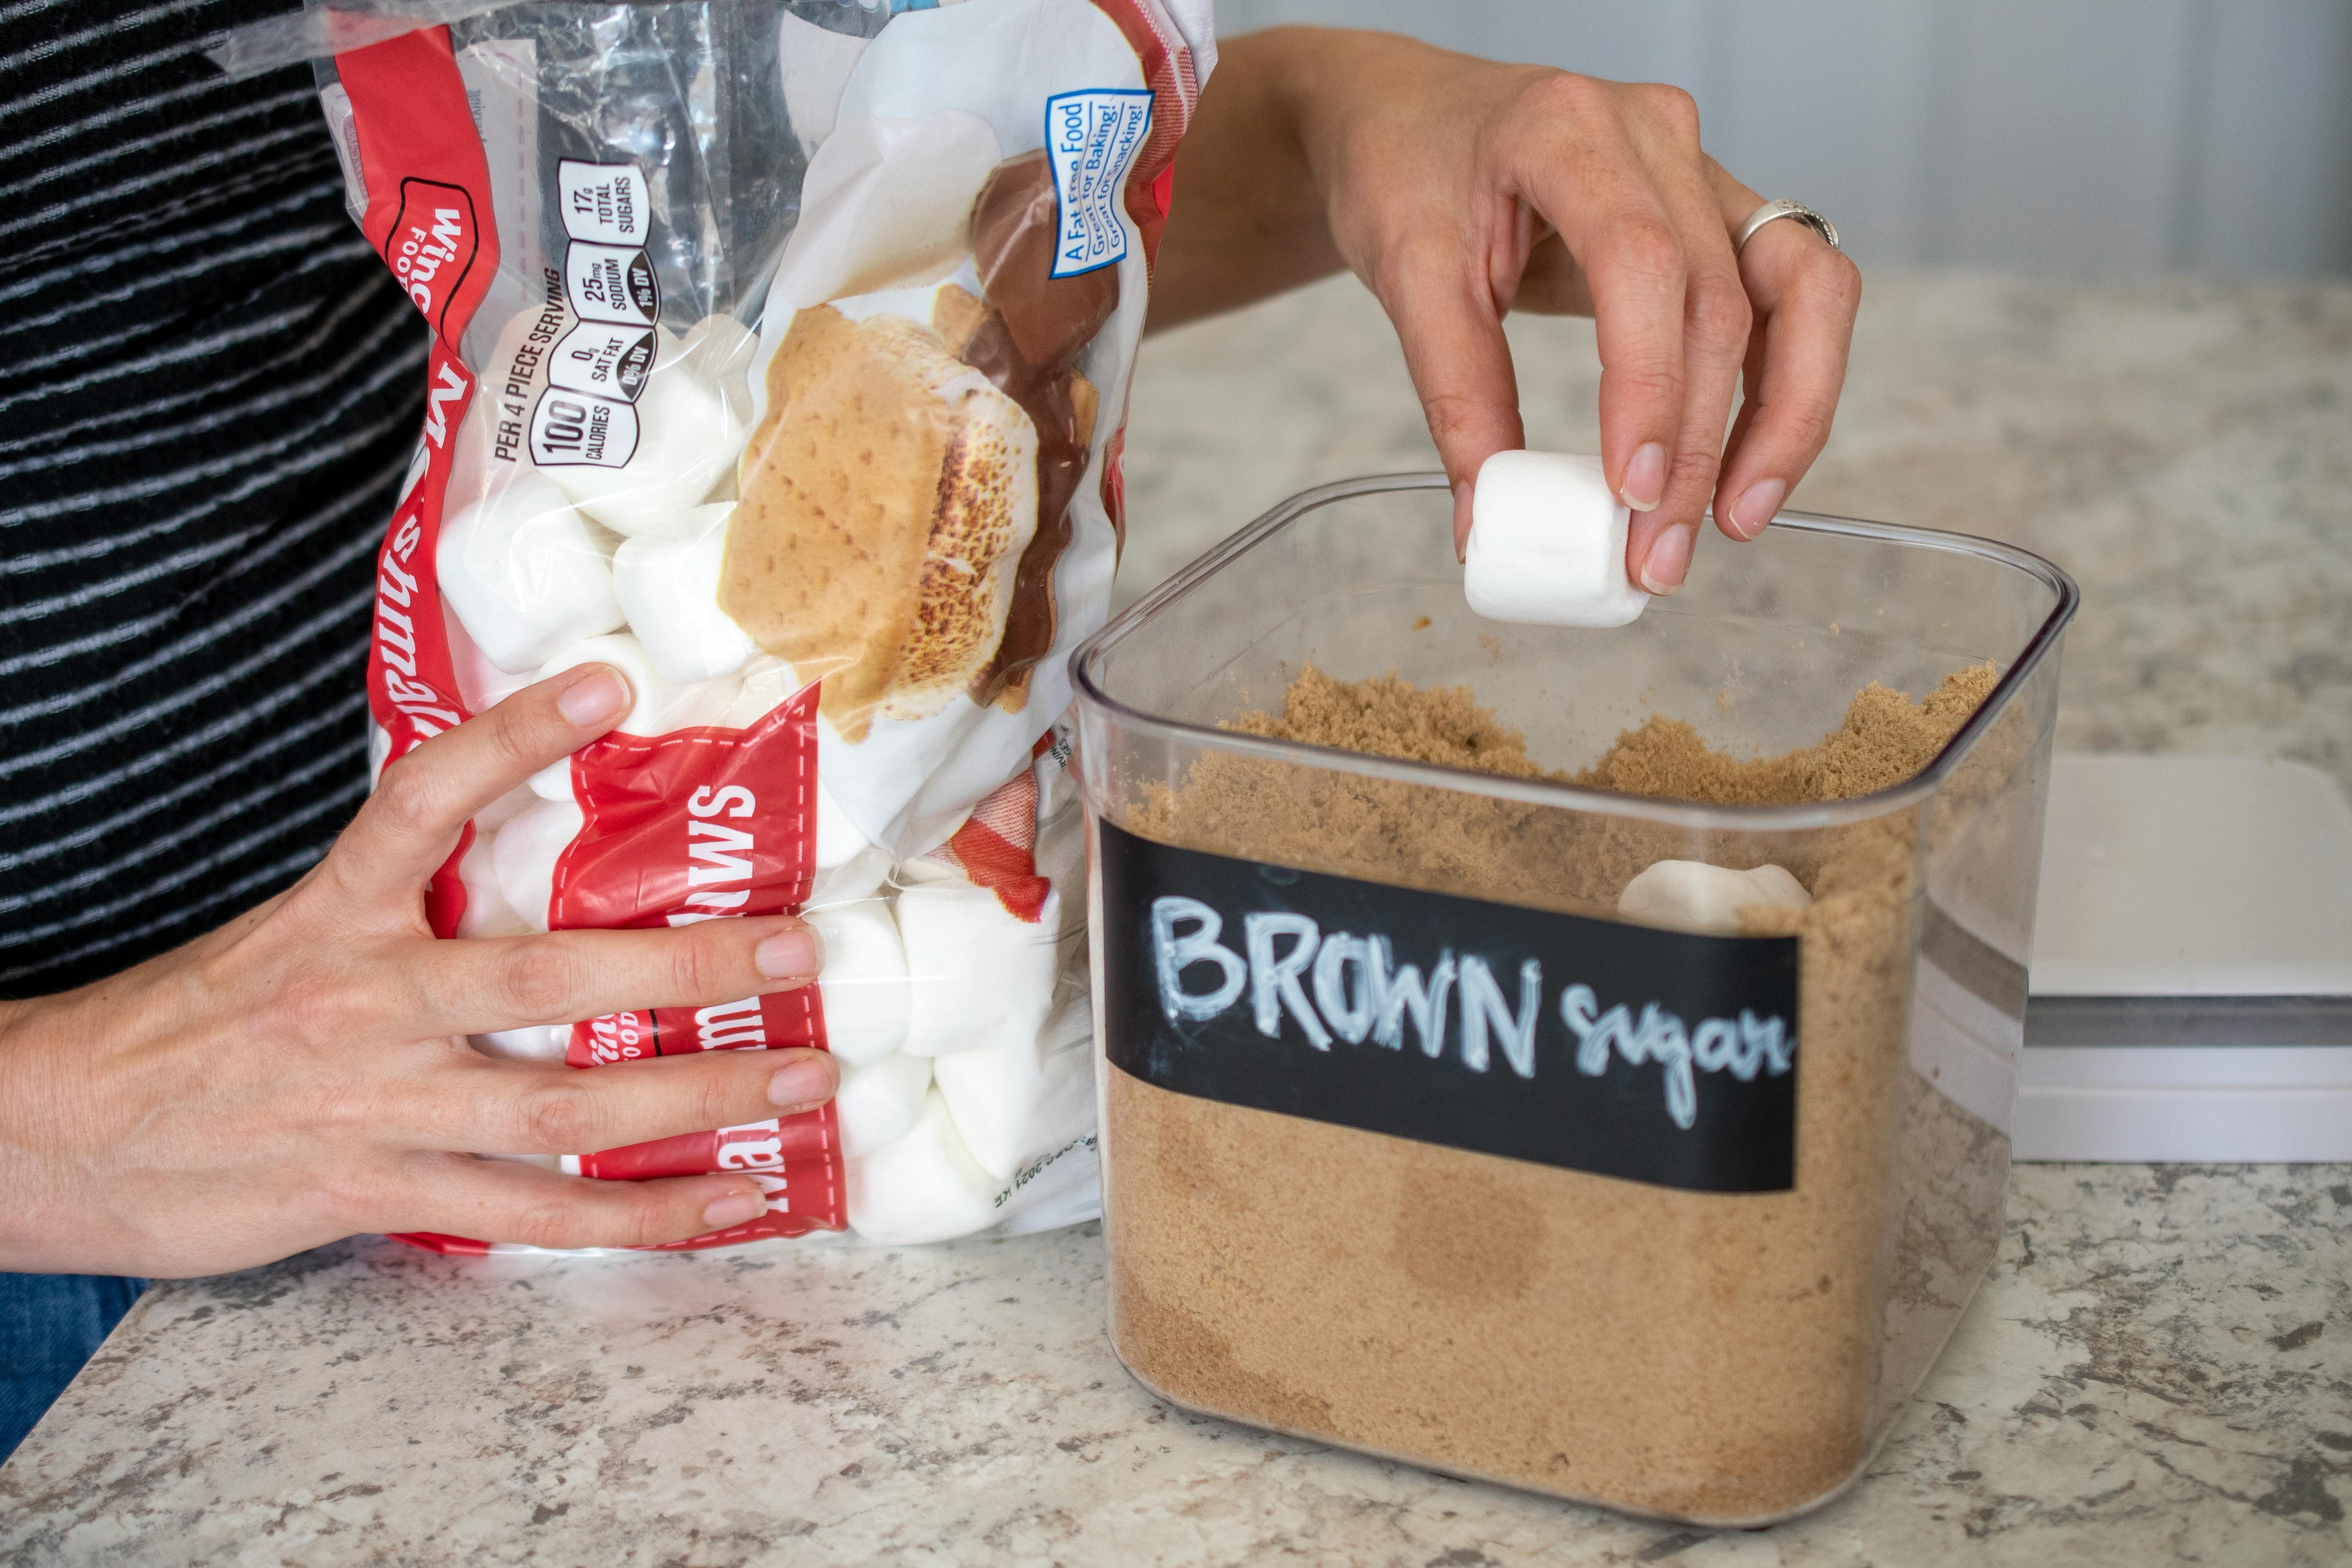 A person putting two large marshmallows inside a container filled with brown sugar.